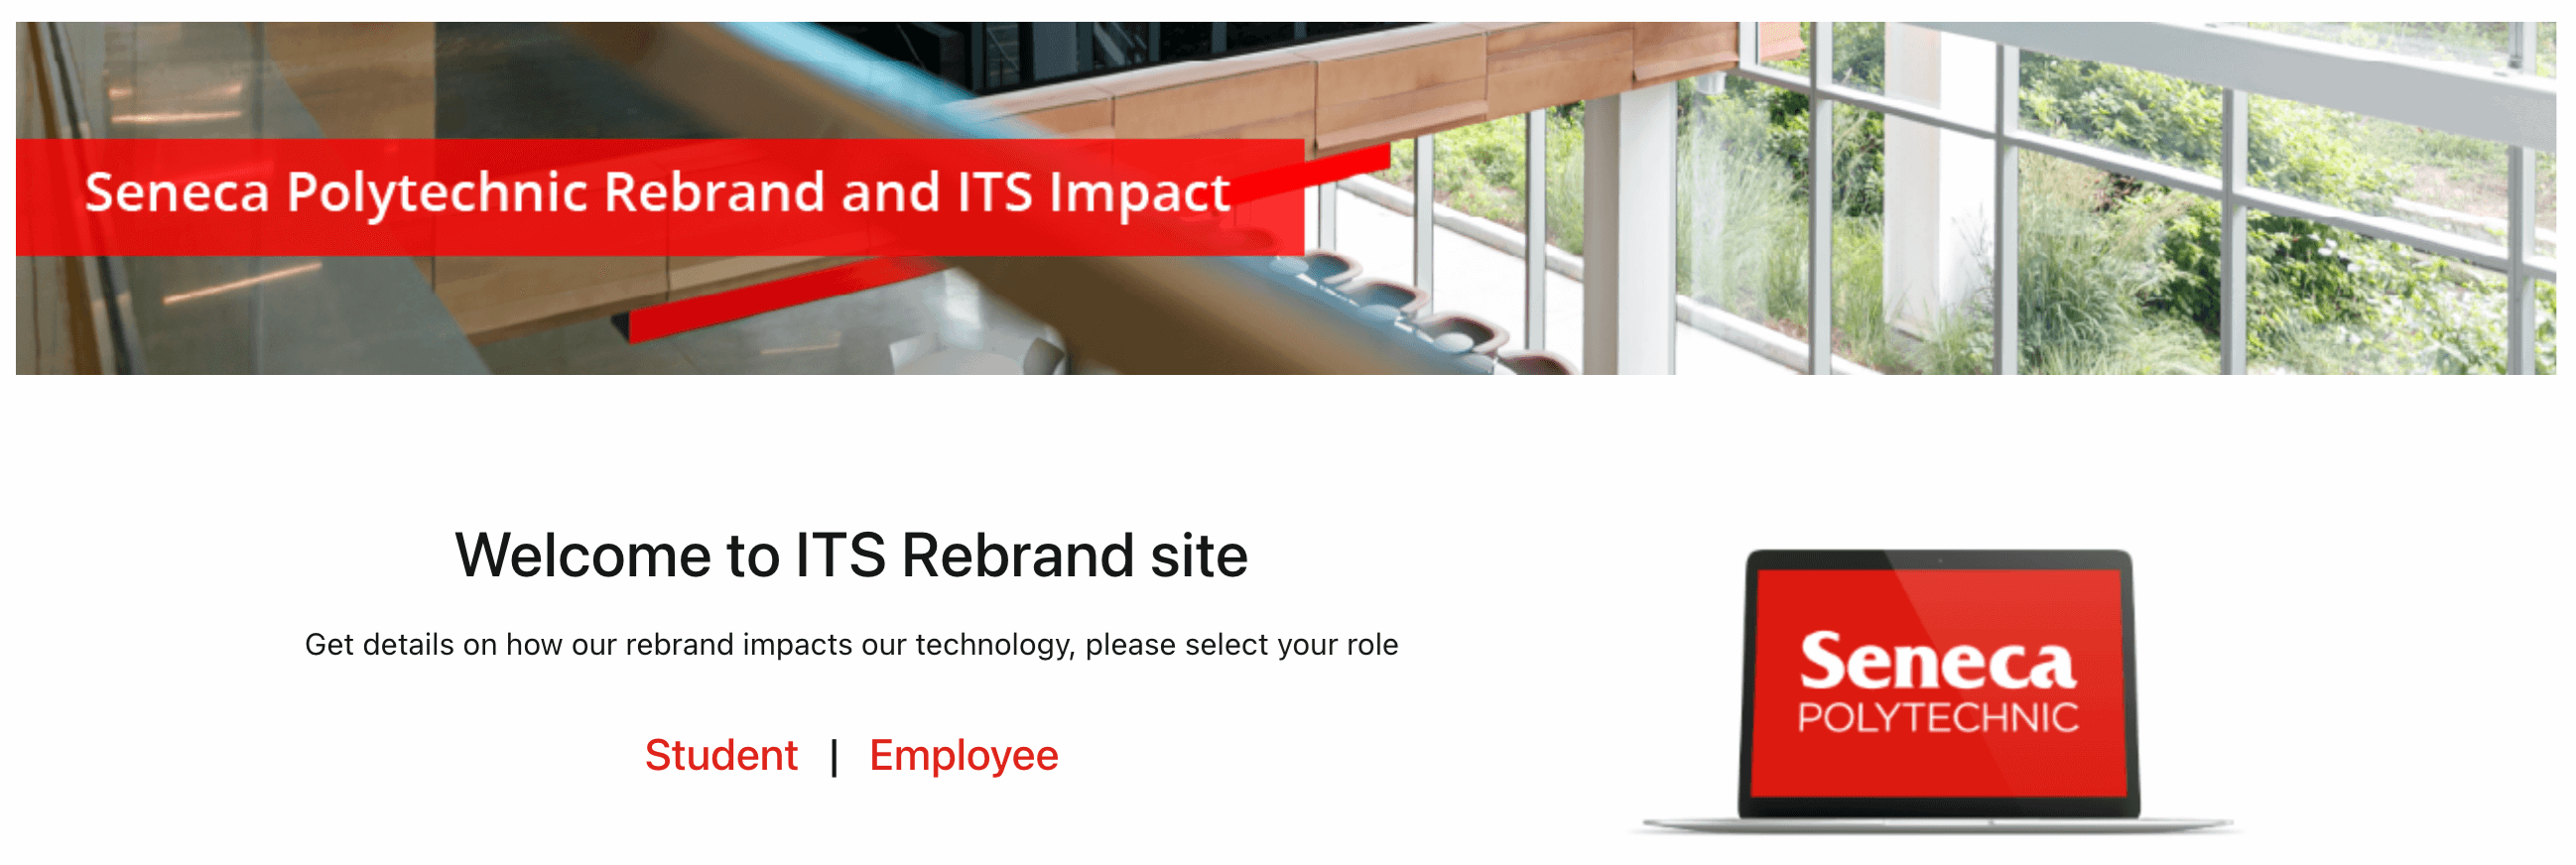 The ITS Rebrand website homepage, available at https://students.senecapolytechnic.ca/spaces/268/its-rebrand/welcome